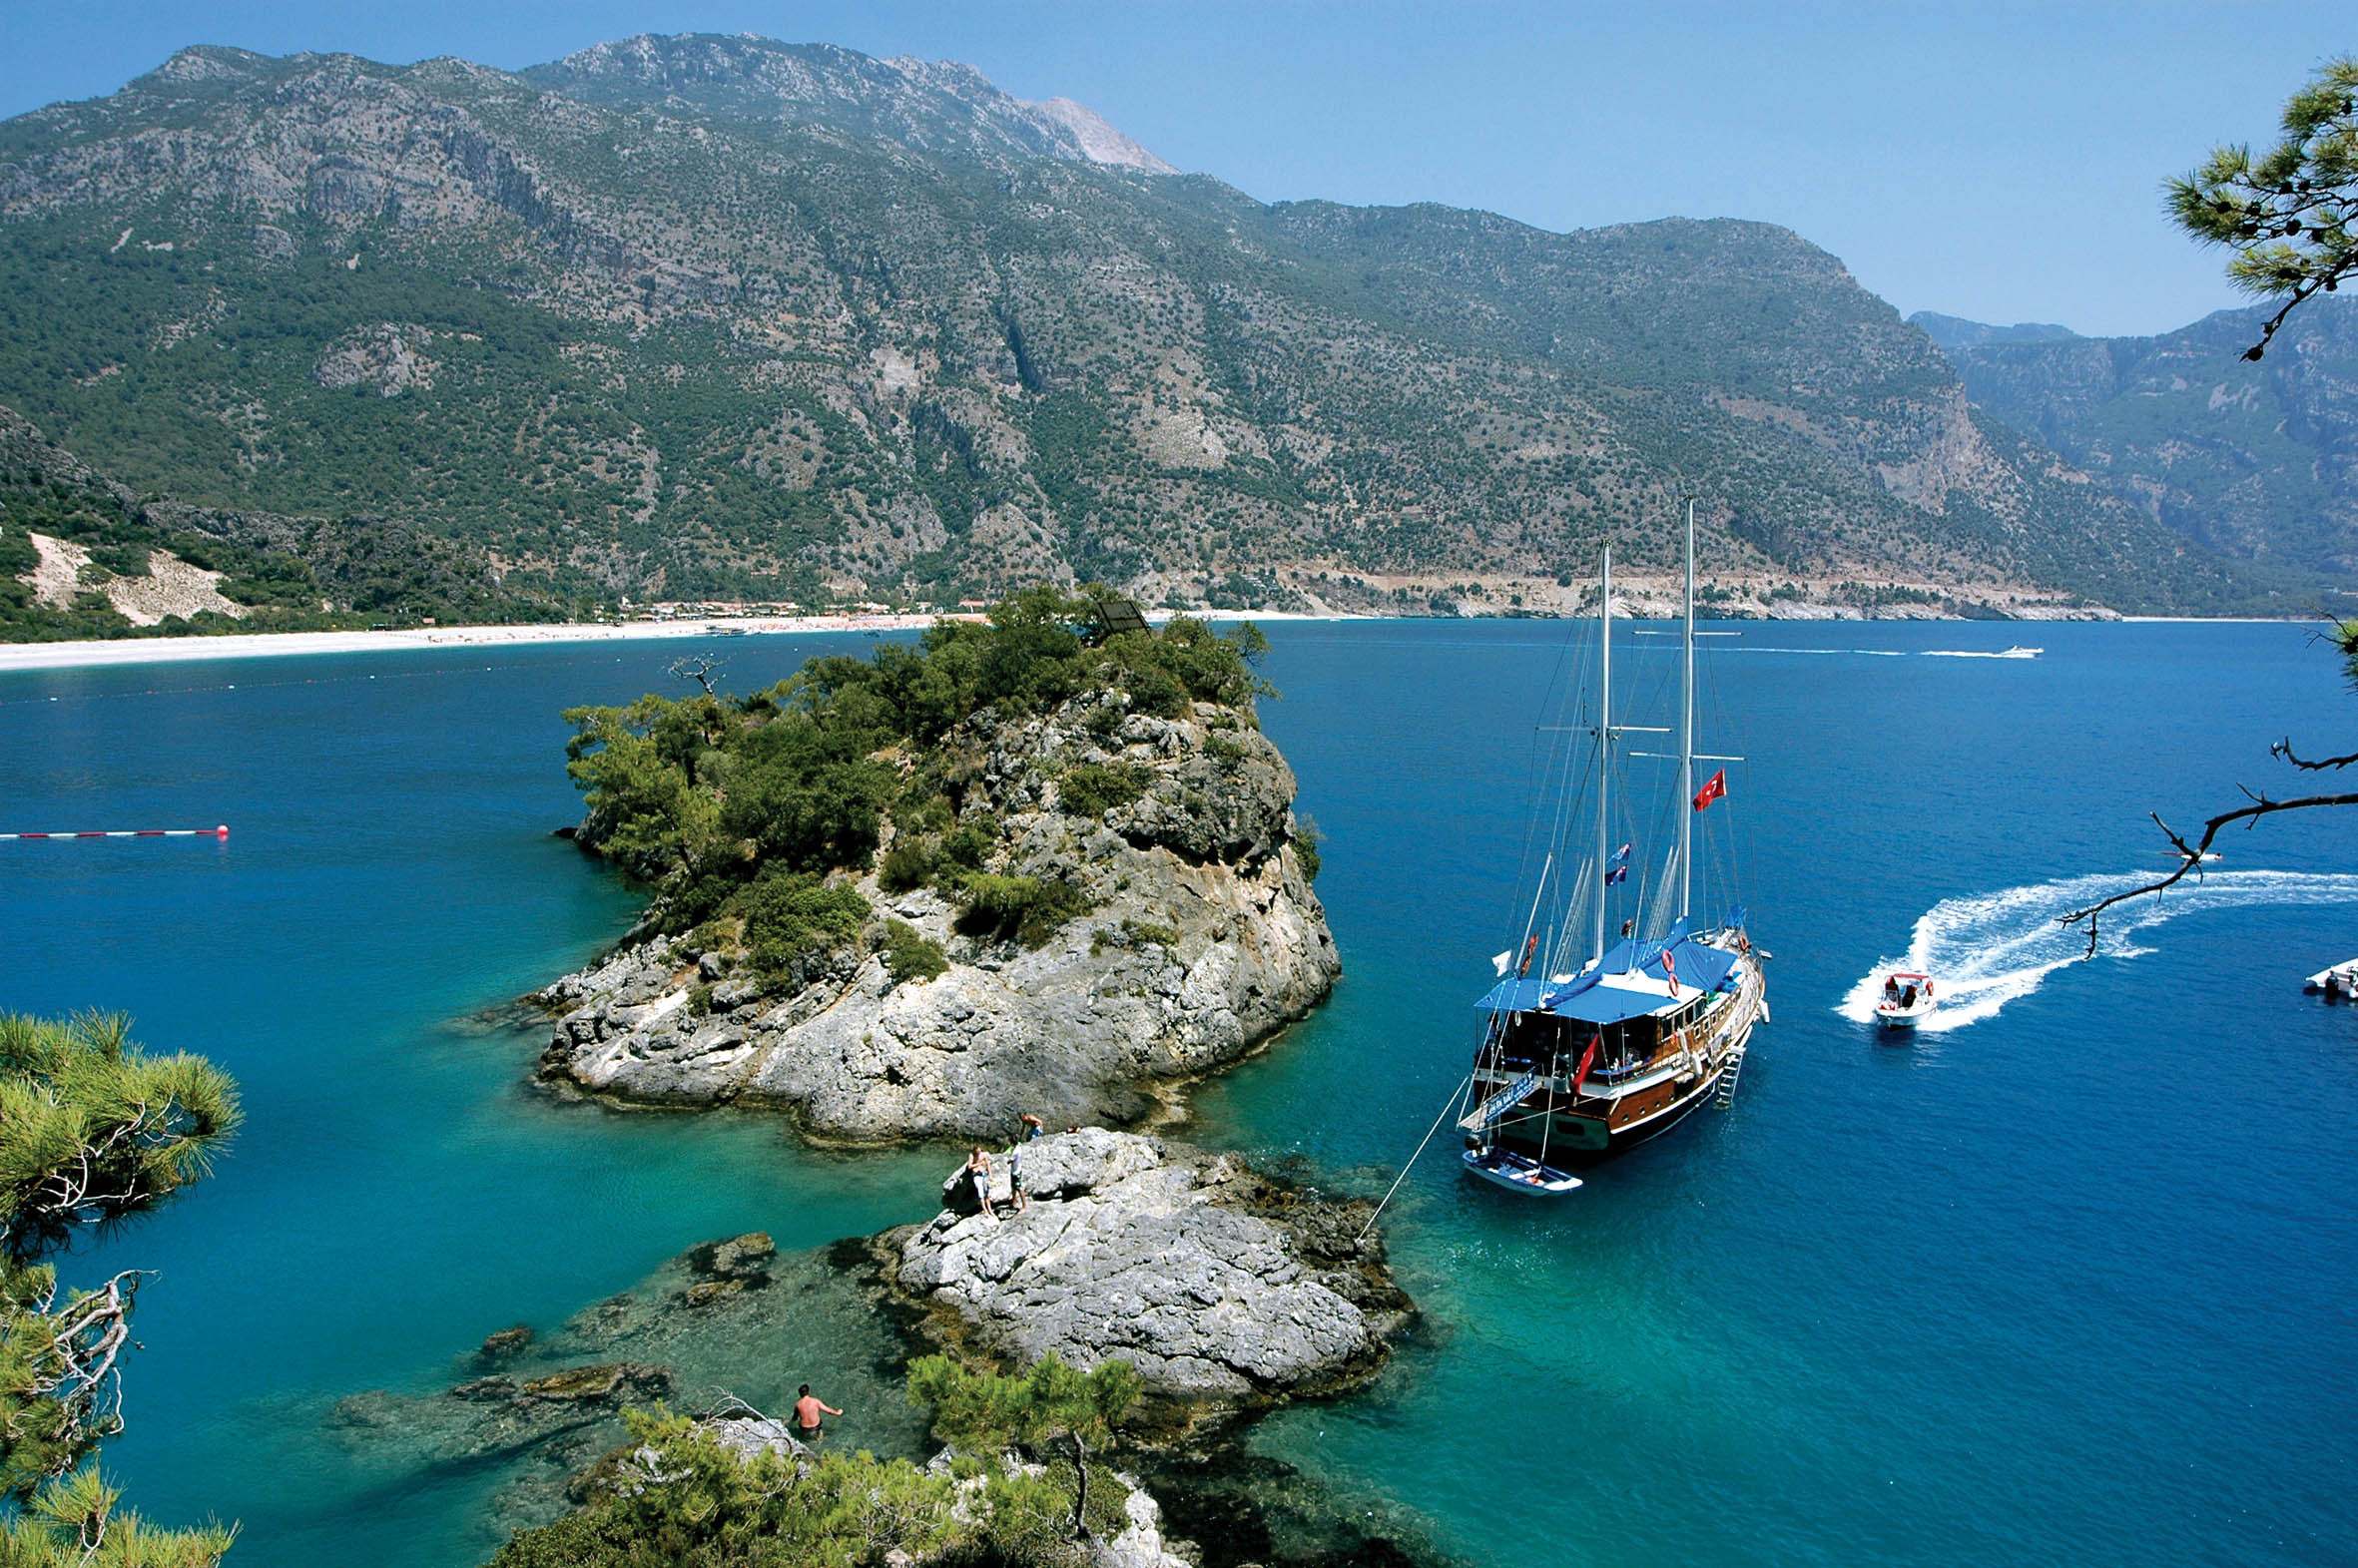 Spring Holiday In Fethiye Turkey Wallpaper And Image